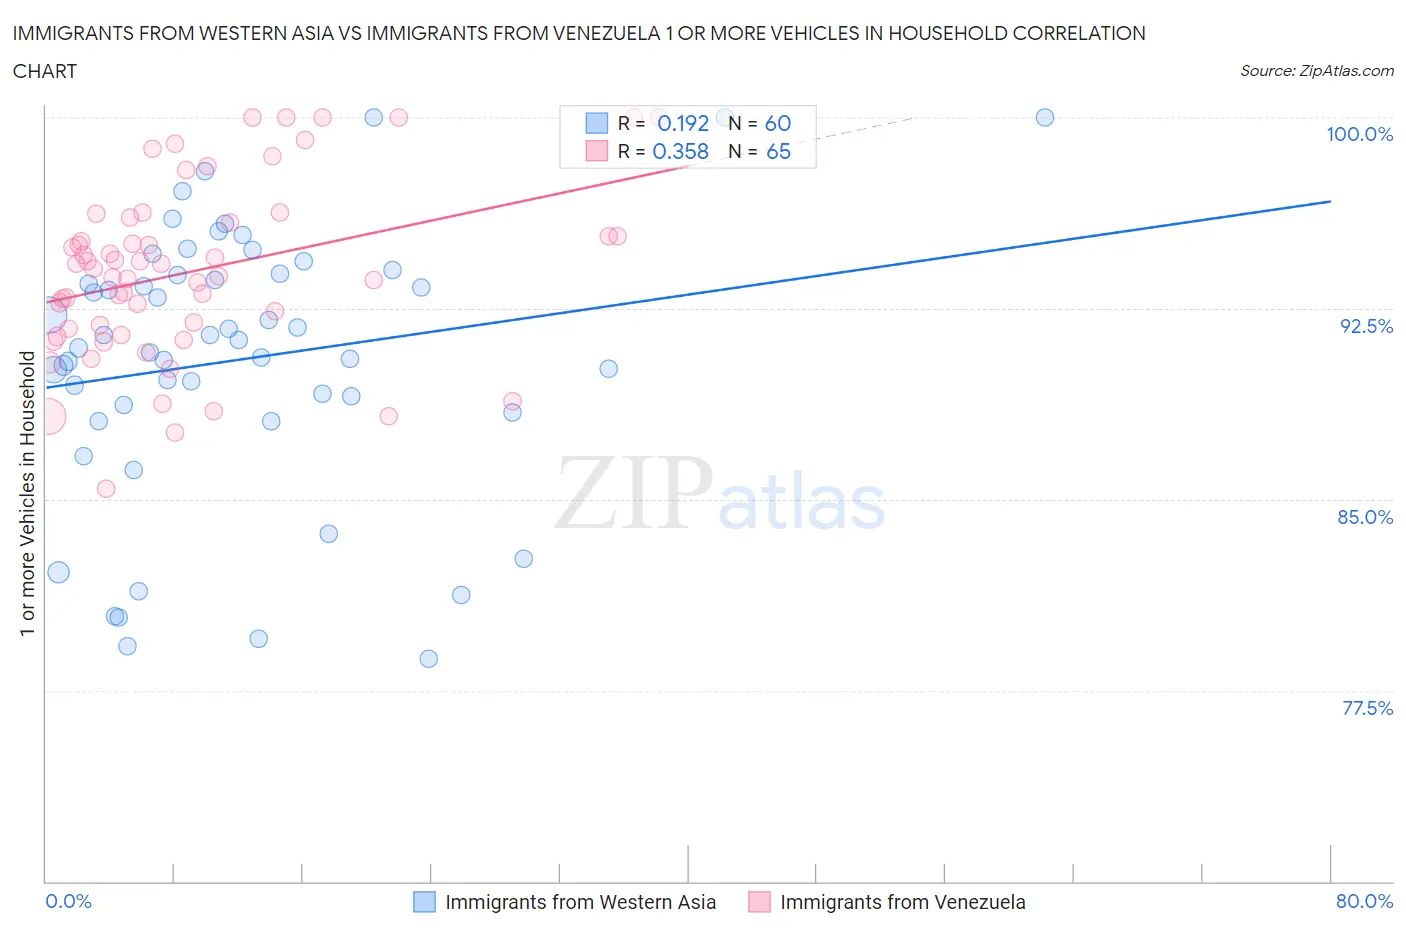 Immigrants from Western Asia vs Immigrants from Venezuela 1 or more Vehicles in Household